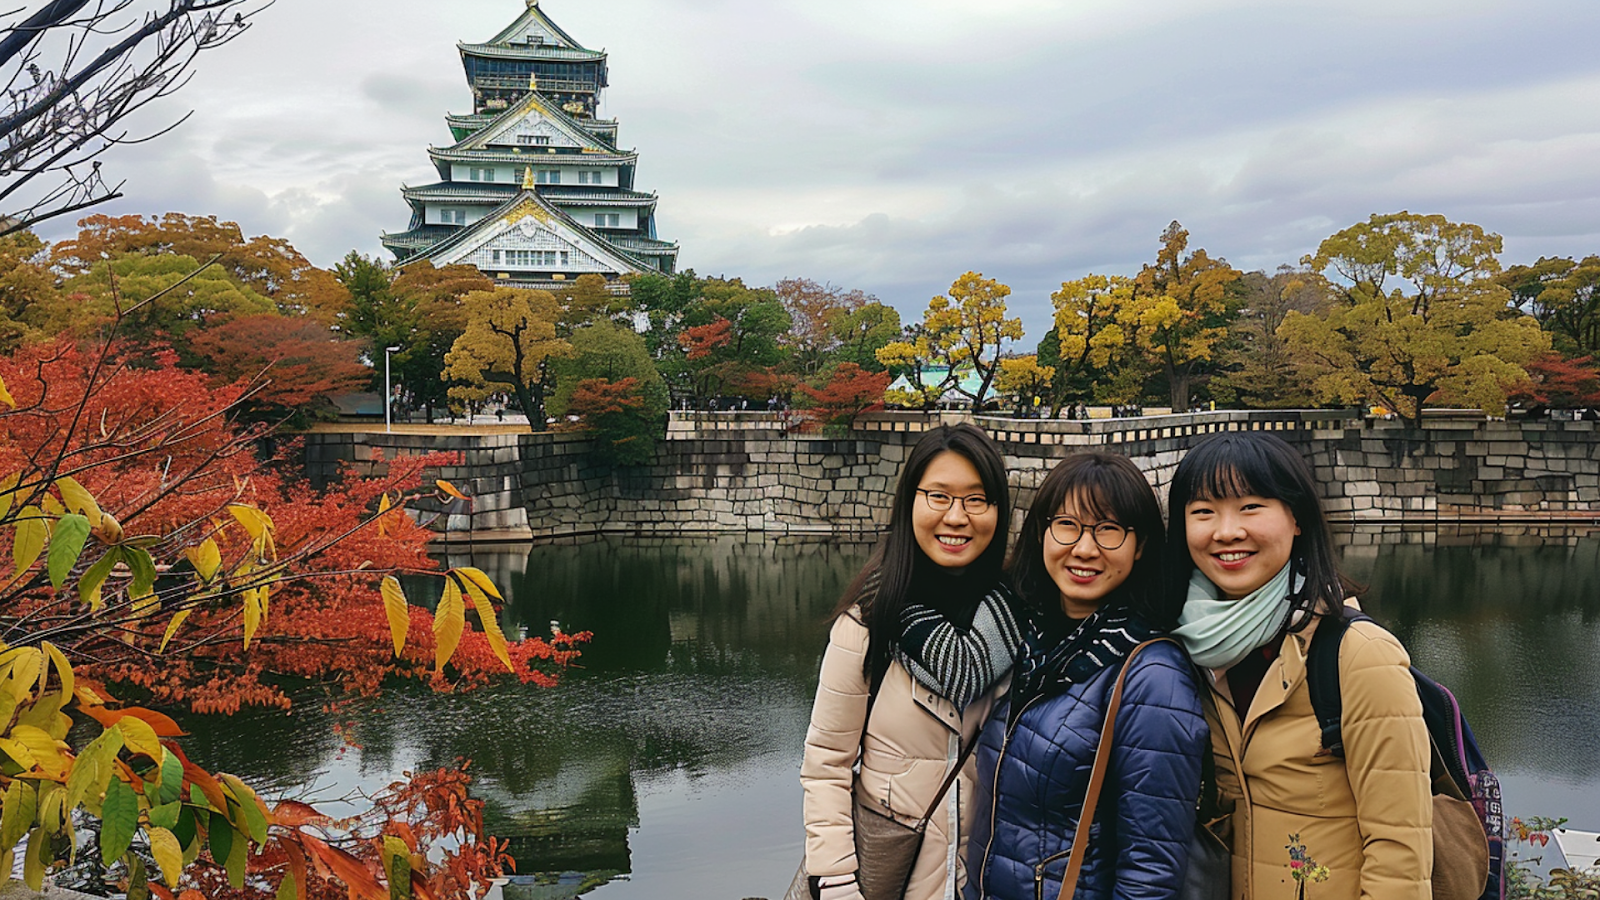 Three women posing for the camera with the Osaka Castle as their backdrop